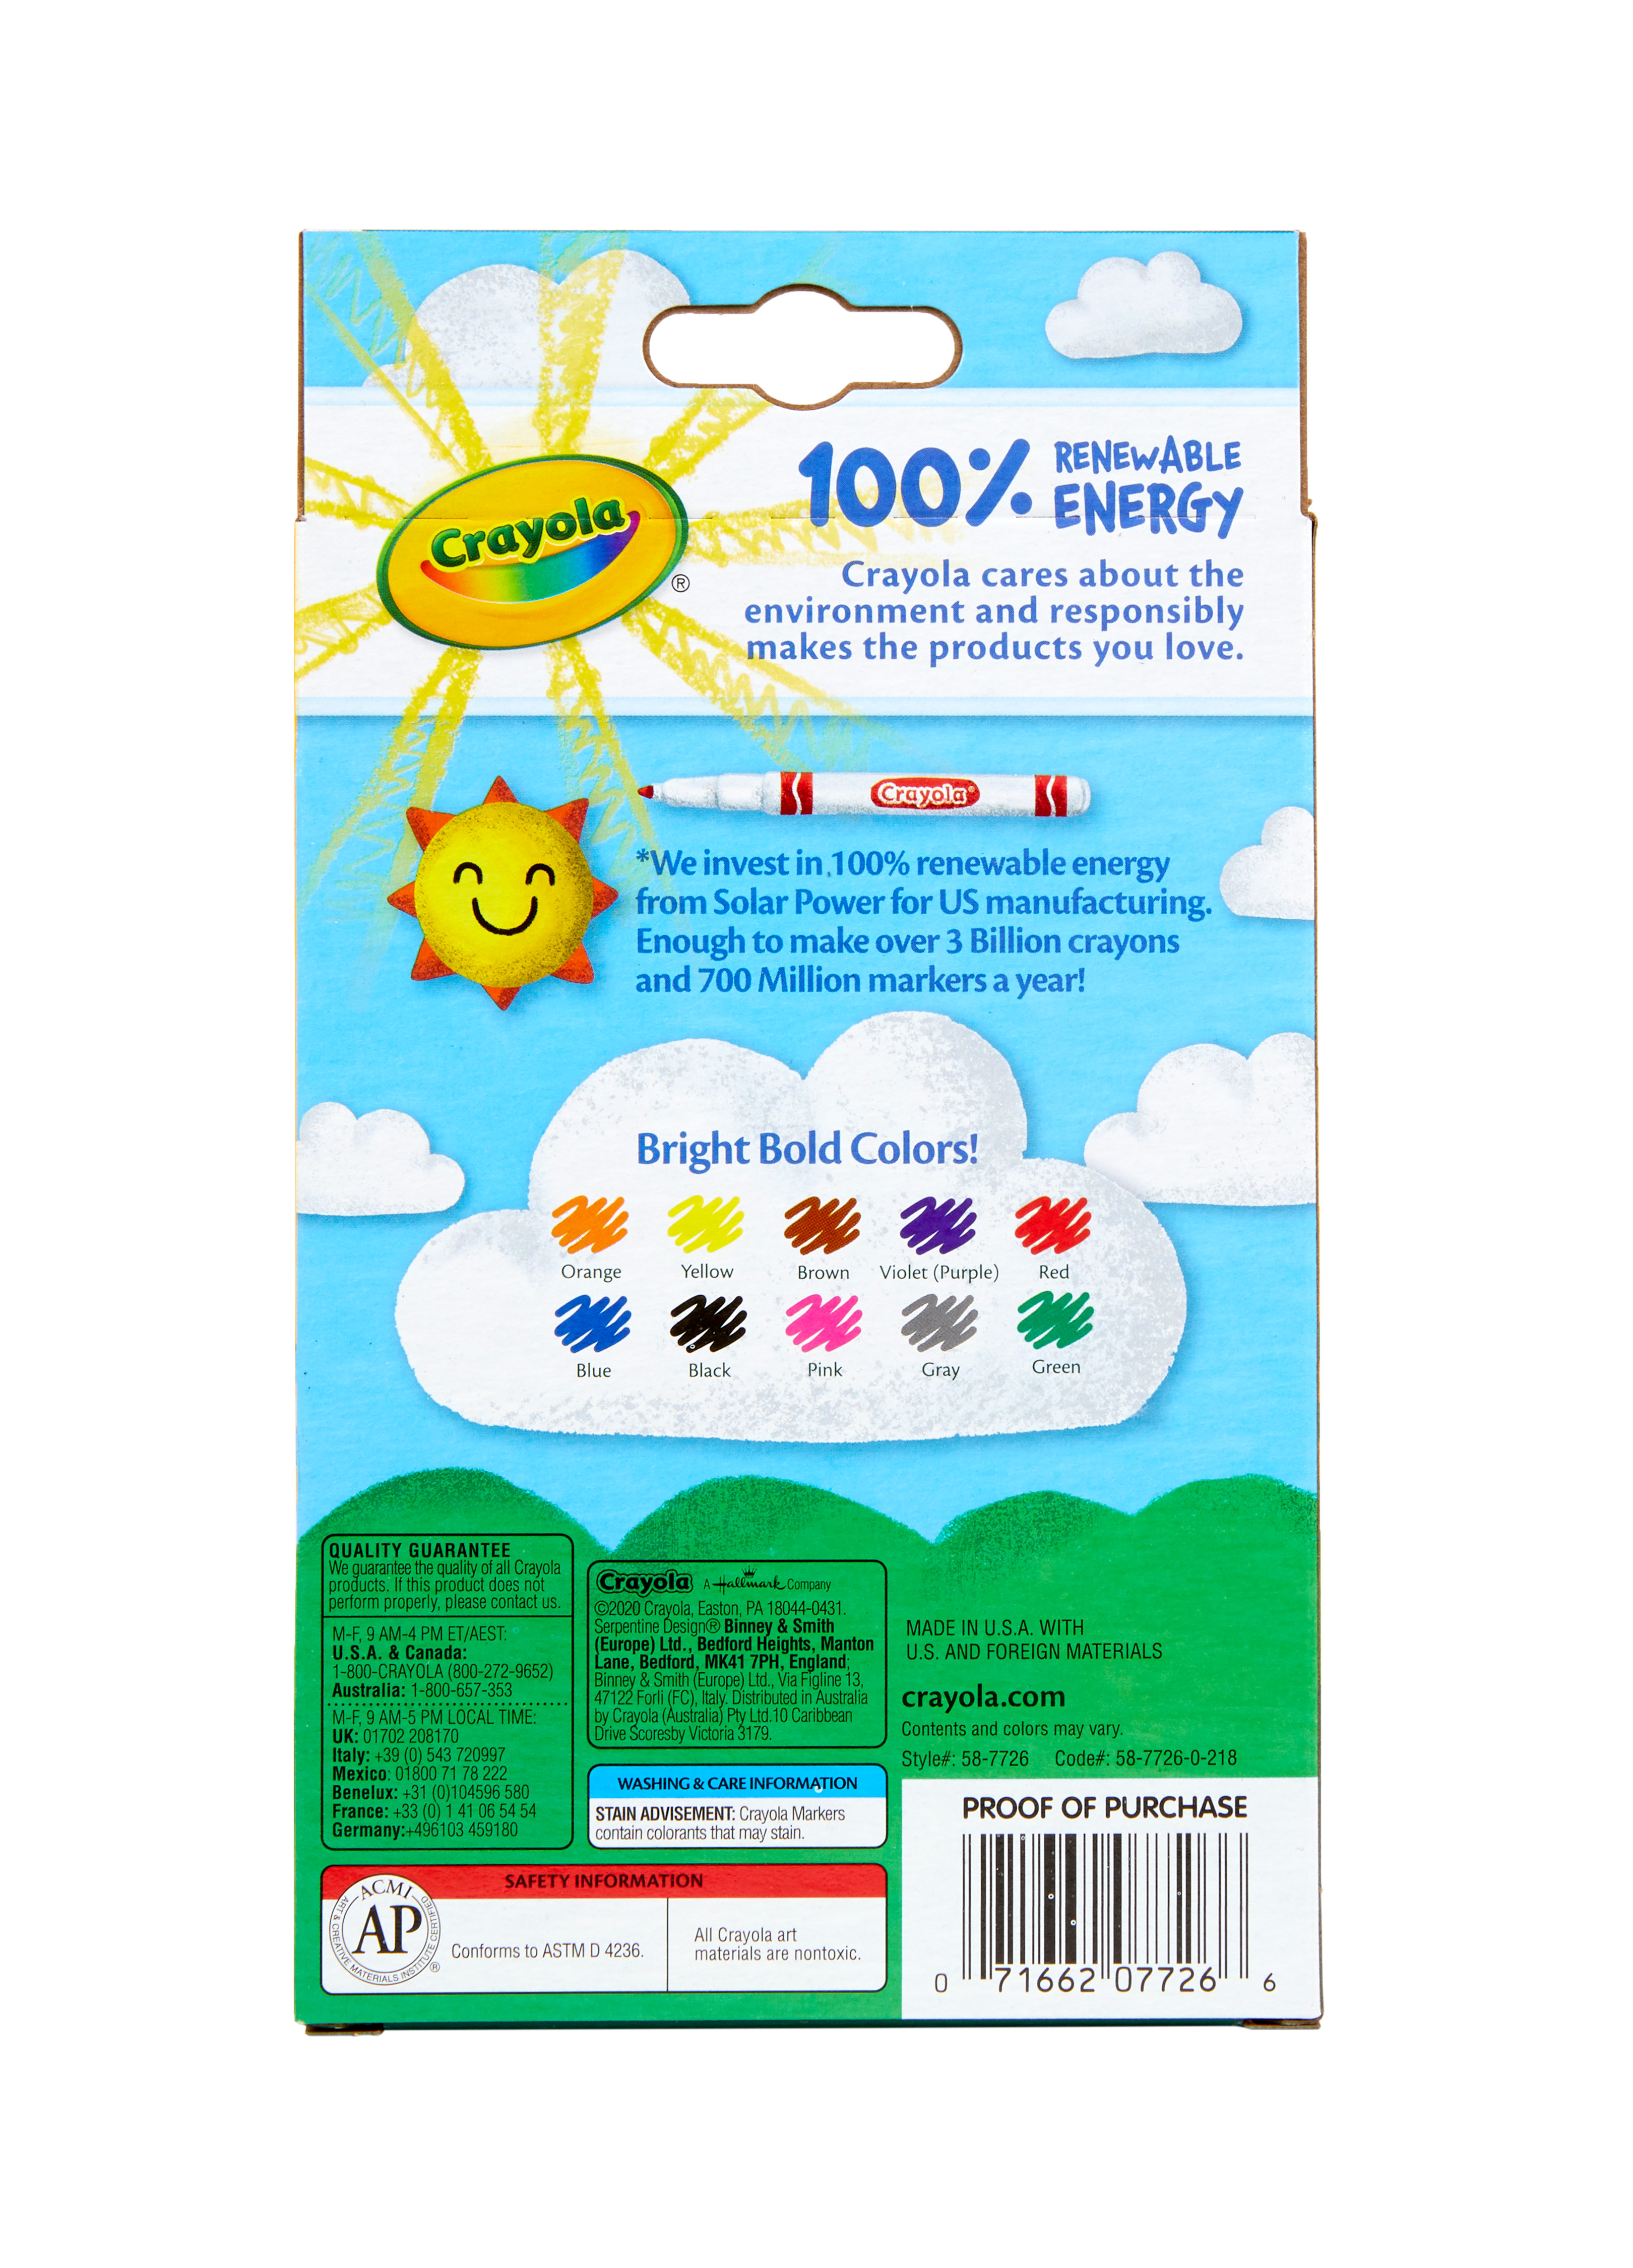 Crayola Classic Thin Line Marker Set, 10 Ct, Multi Colors, Back to School Supplies for Kids - image 6 of 9